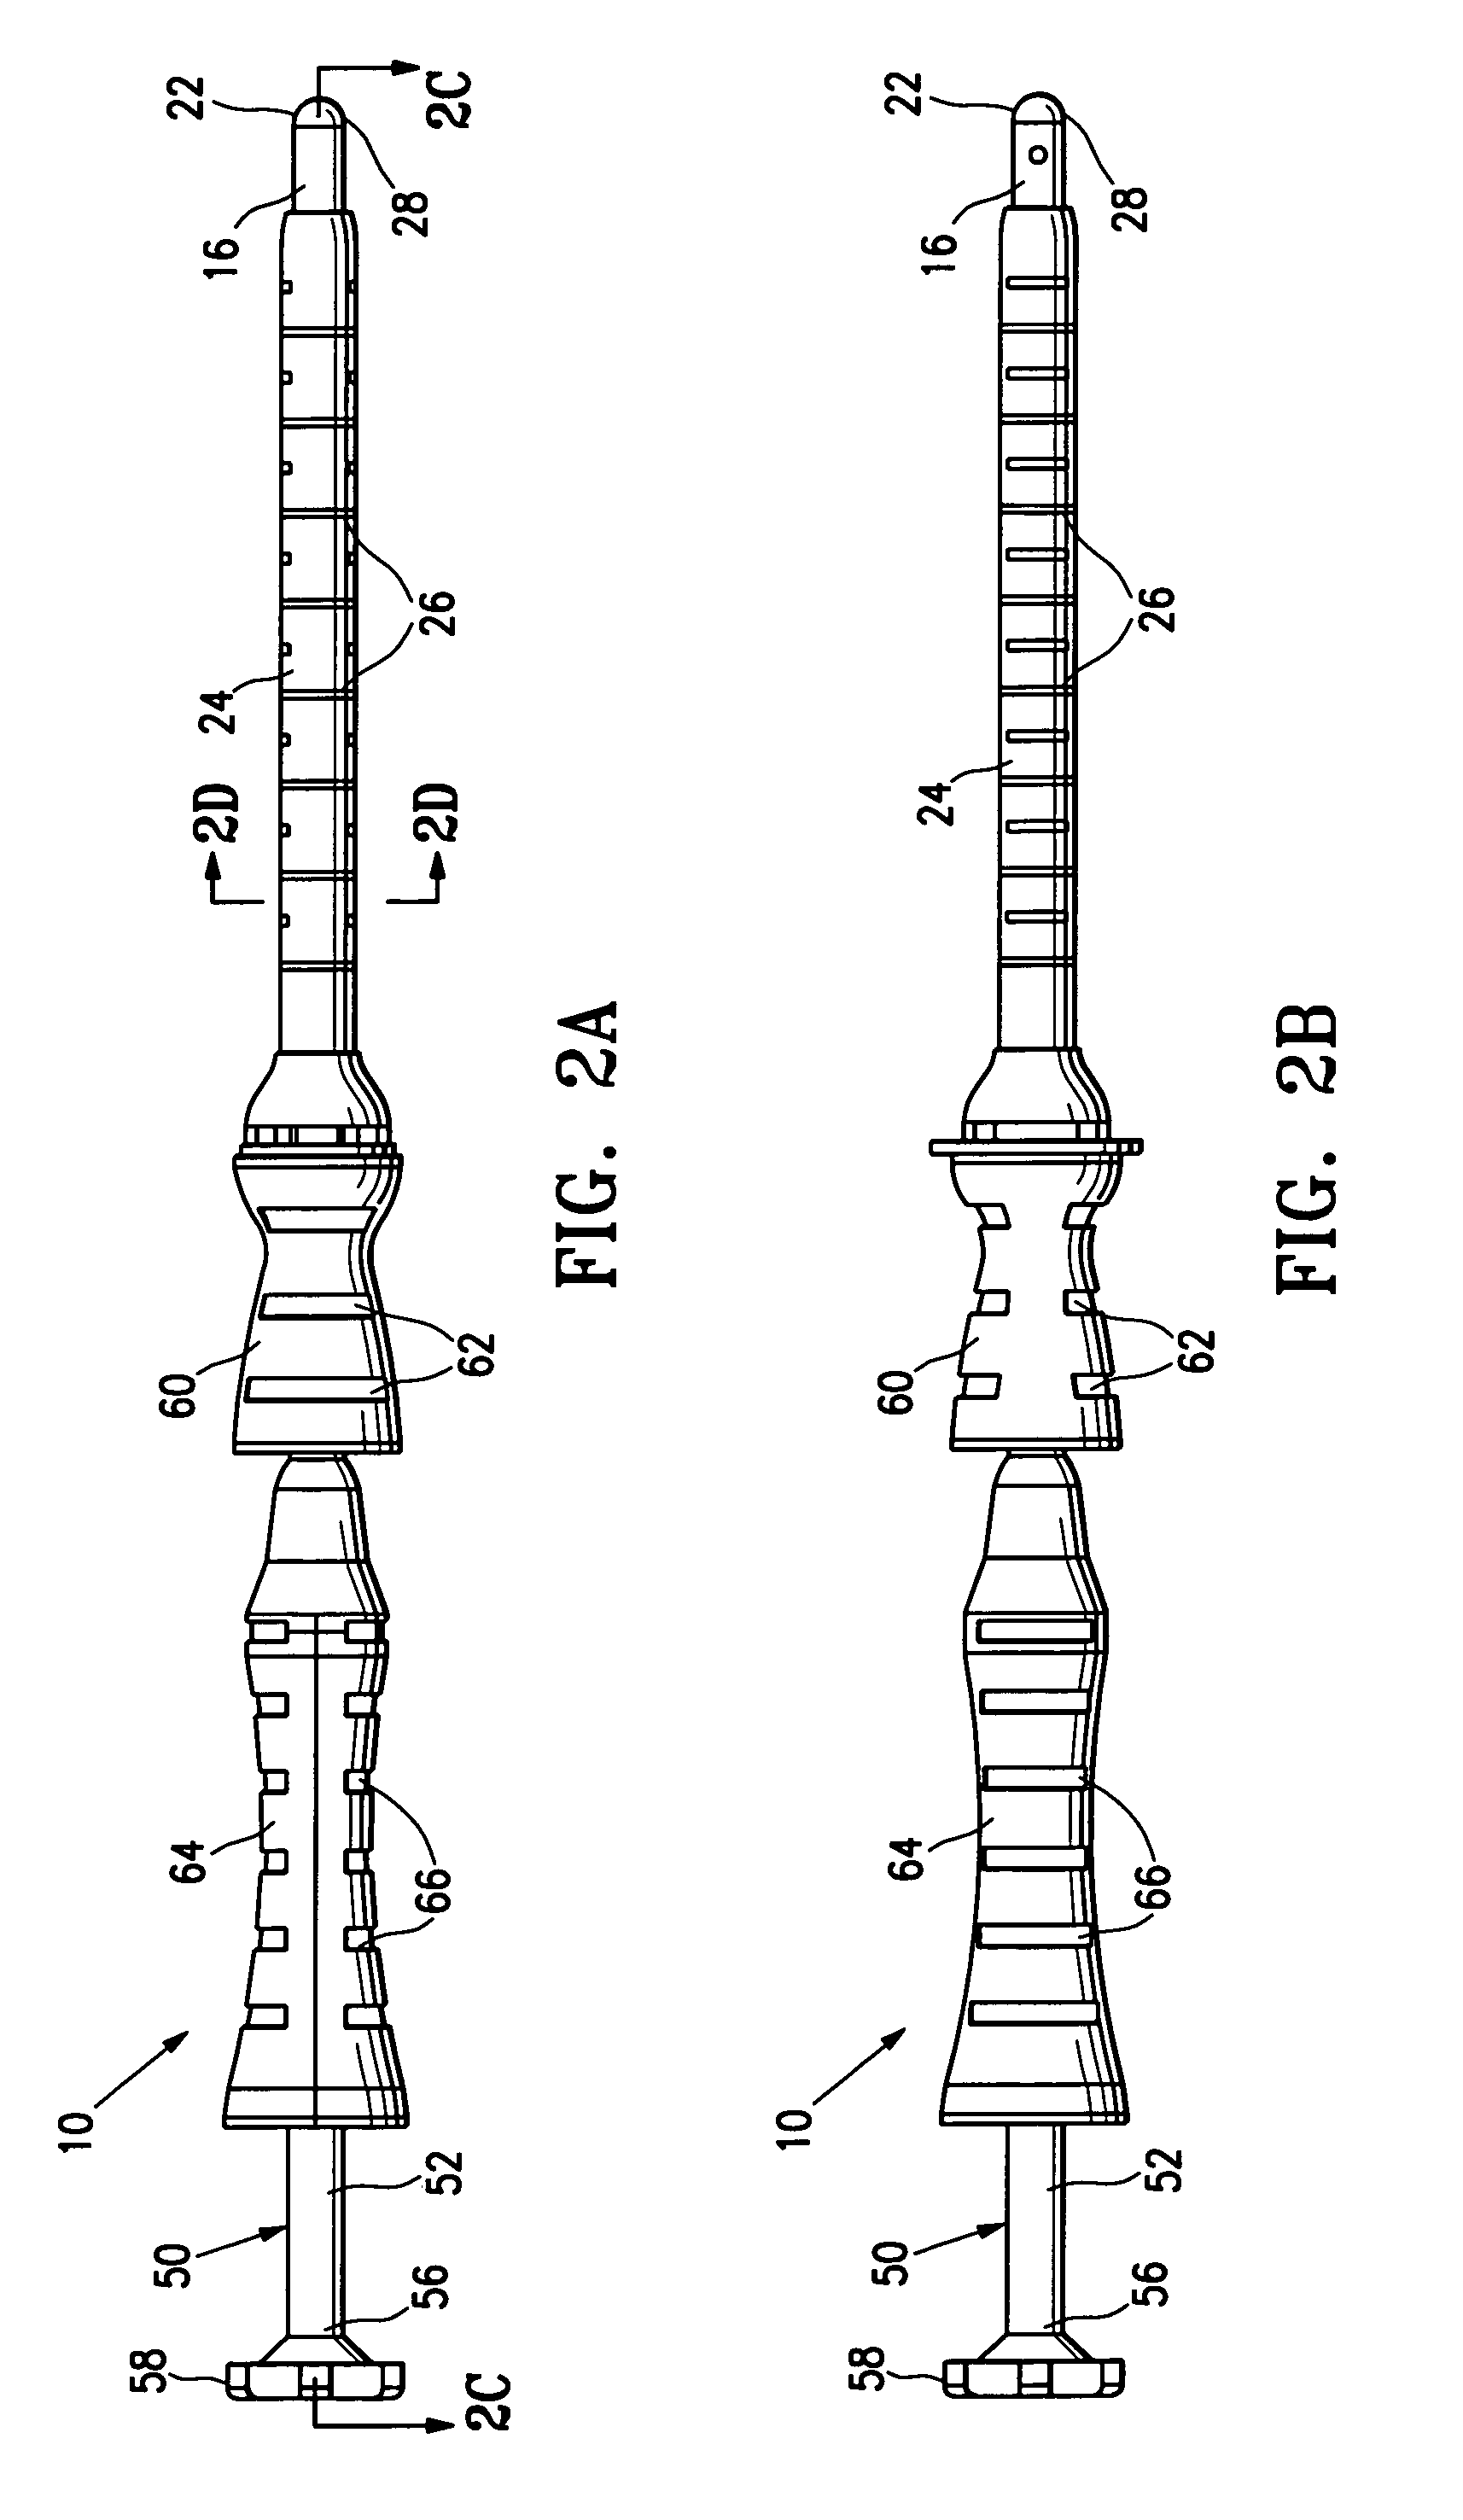 Marker delivery system with obturator